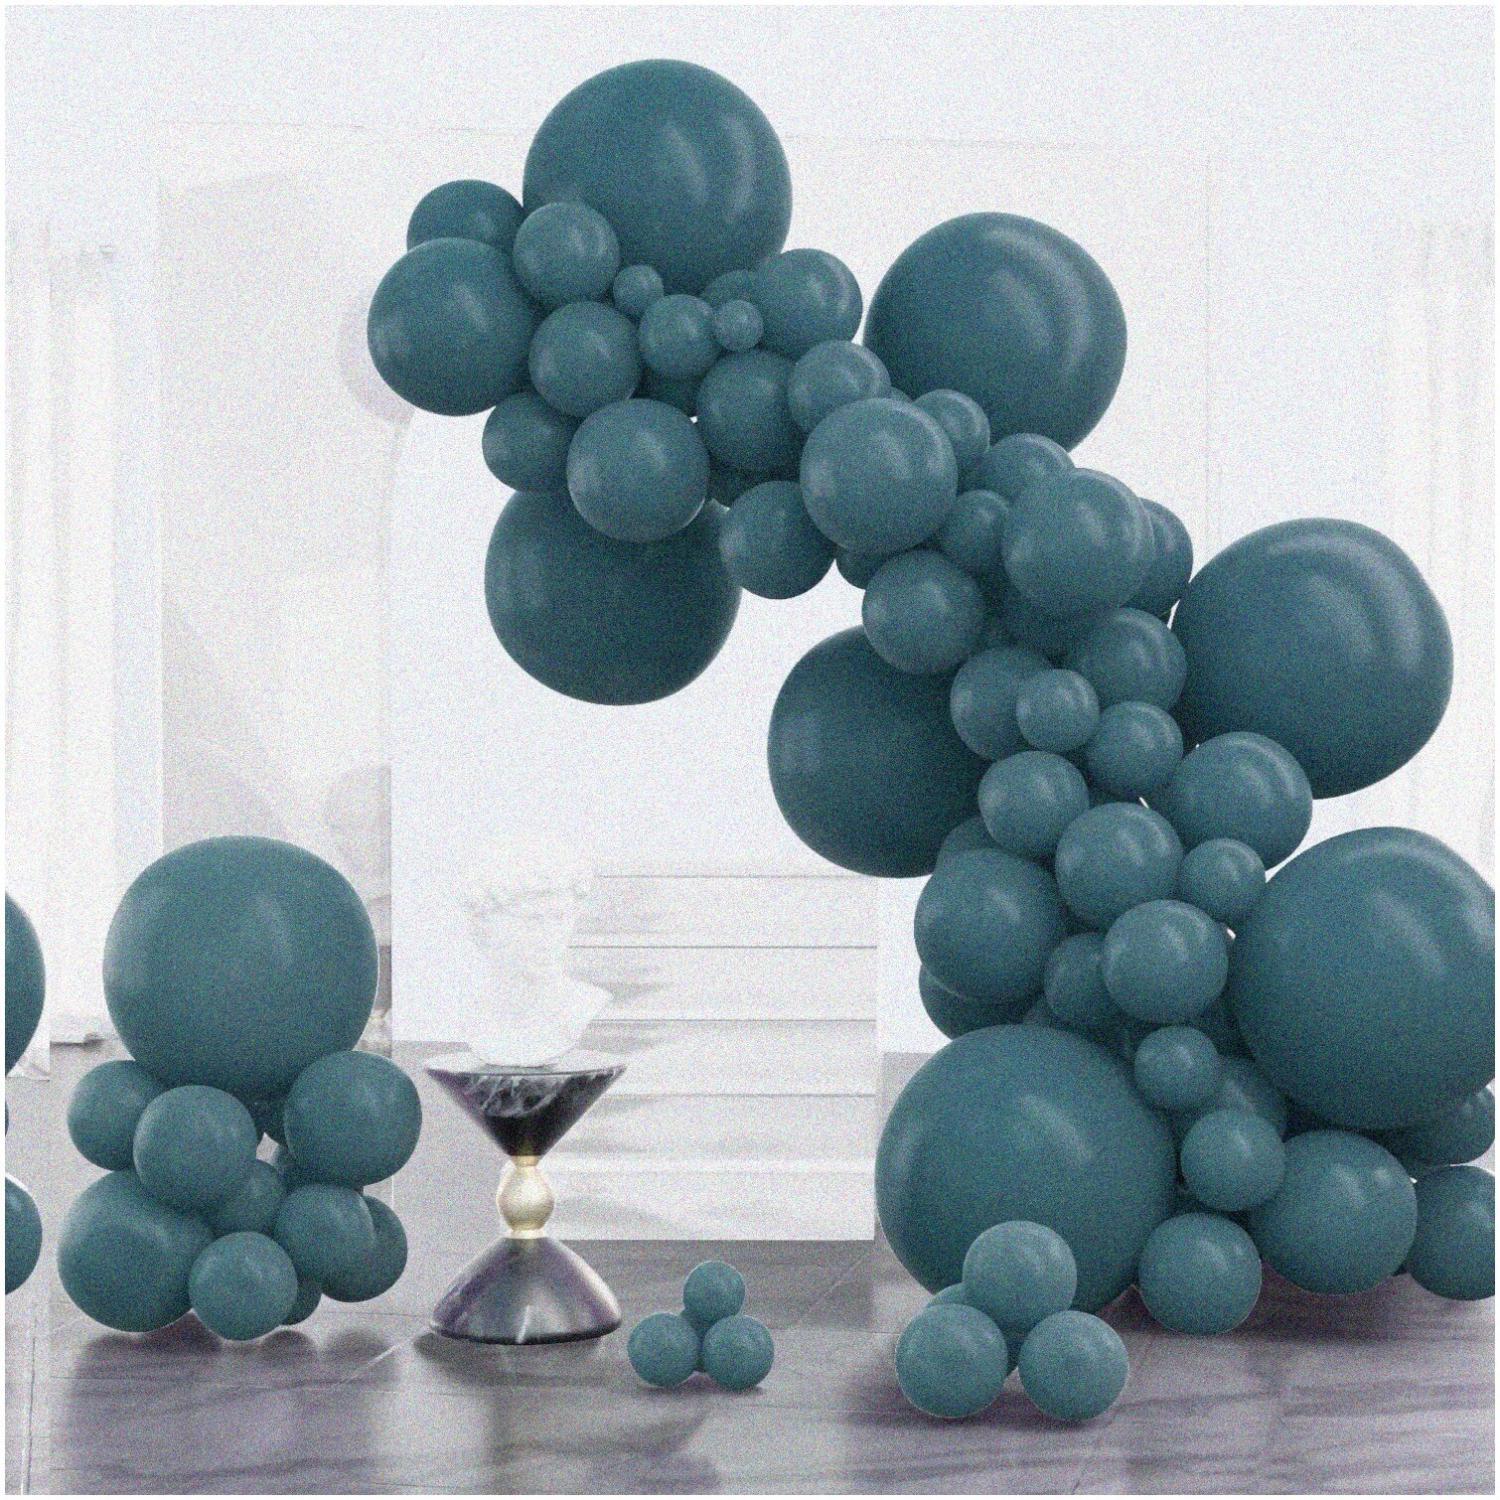 Boho Blue Balloon Variety Pack - 100 pcs of 18, 12, 10, and 5 Inch Retro Blue Balloons for Balloon Garlands, Arches, and Party Decor